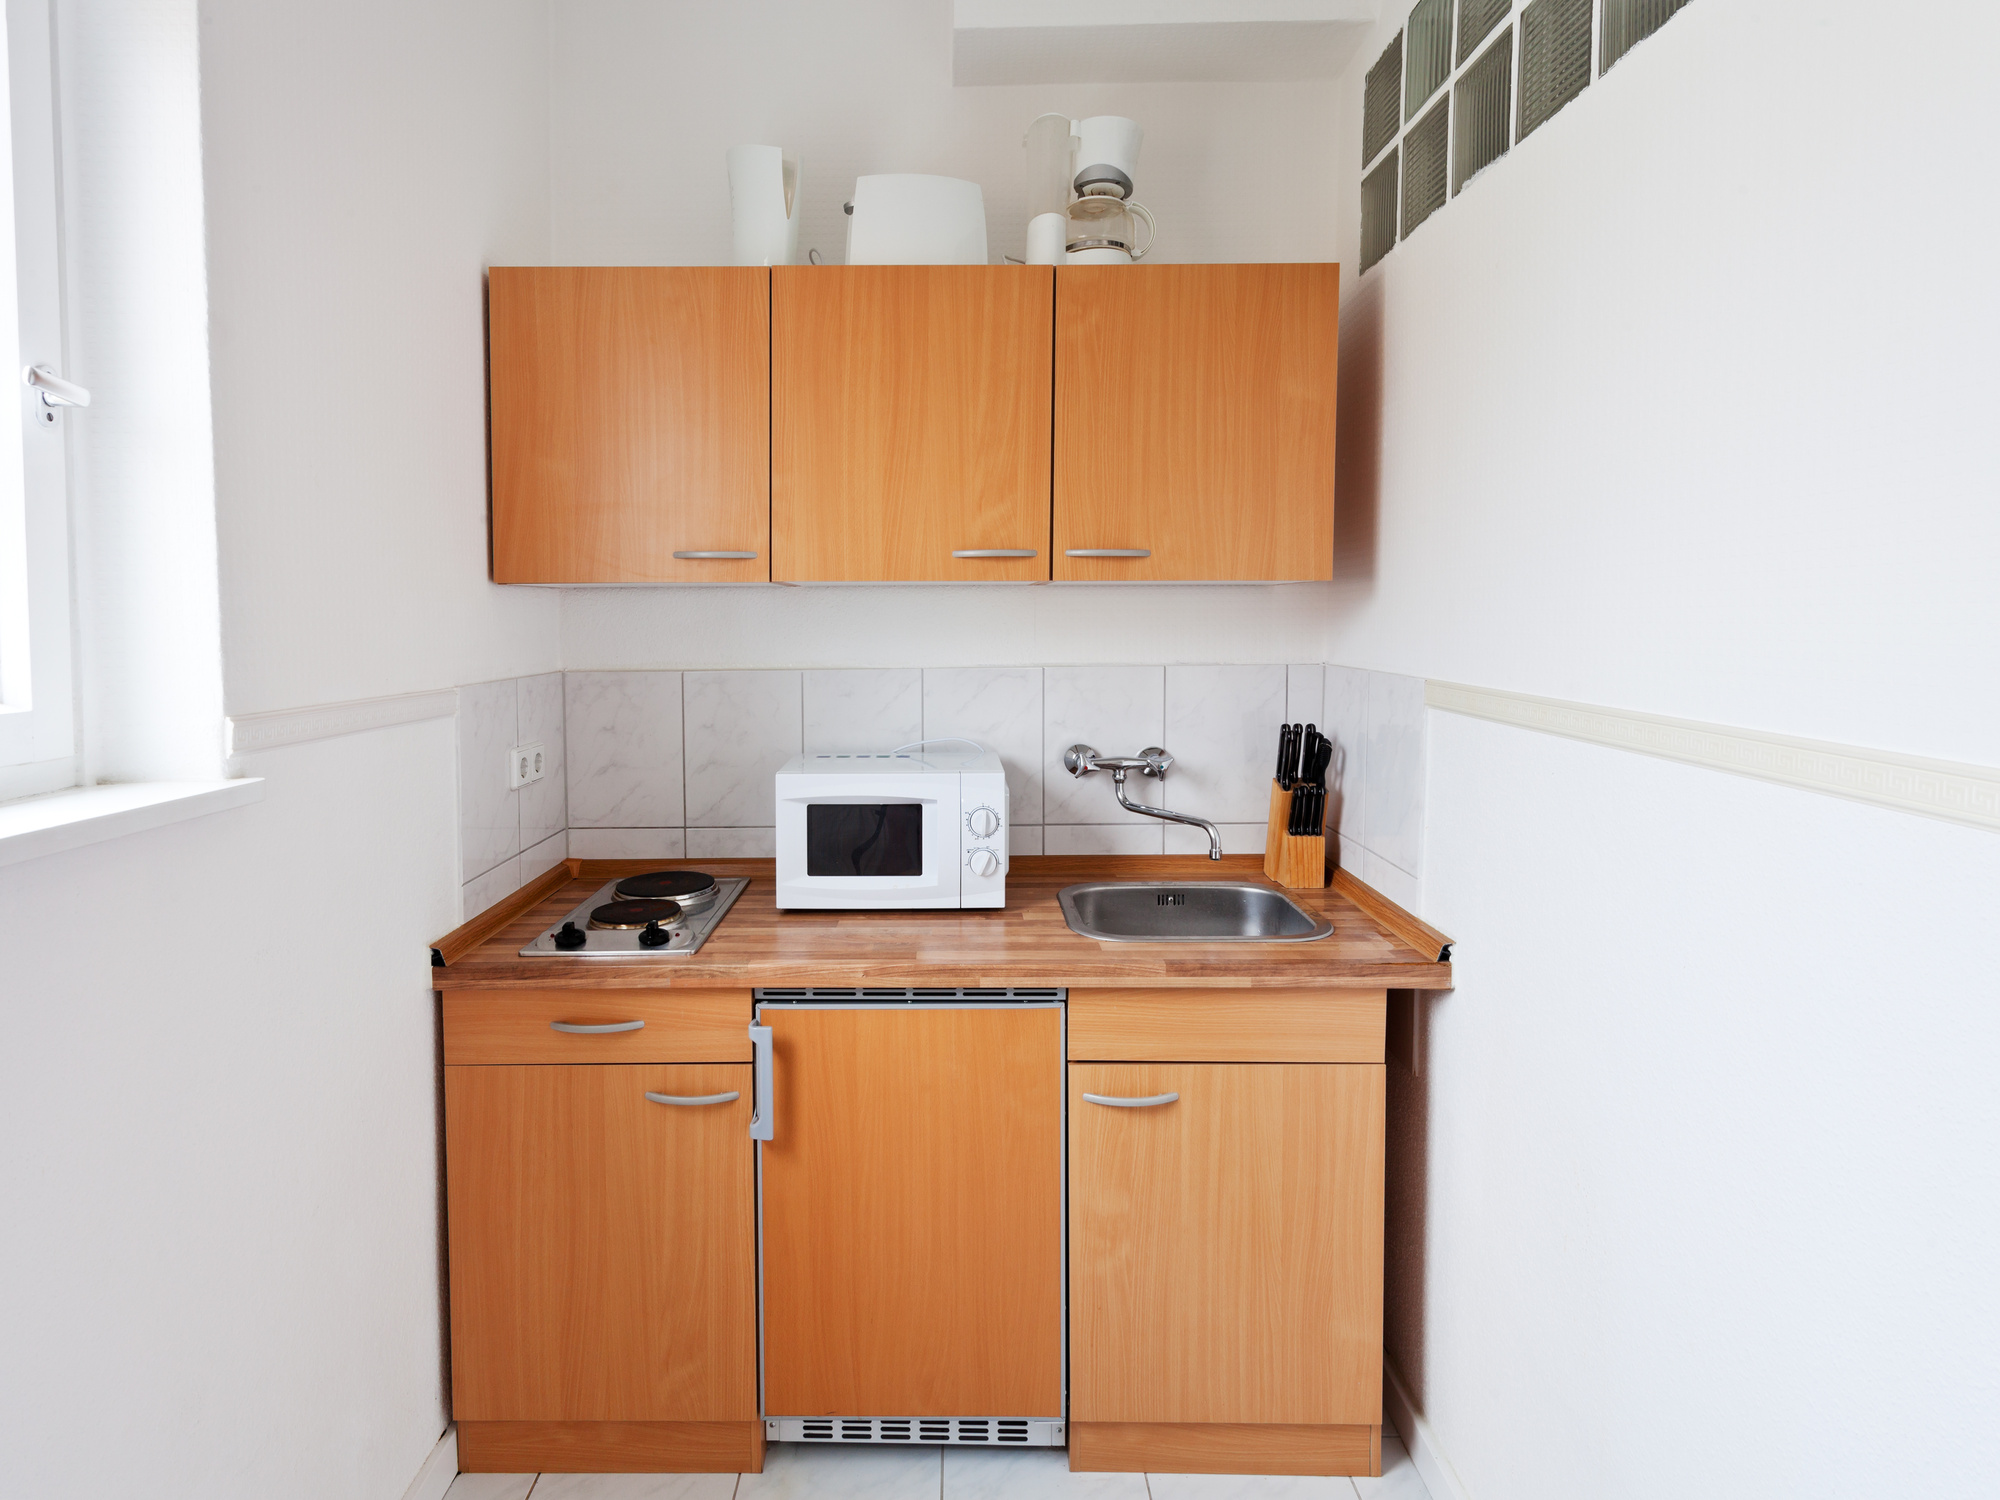 ideal design for small kitchen